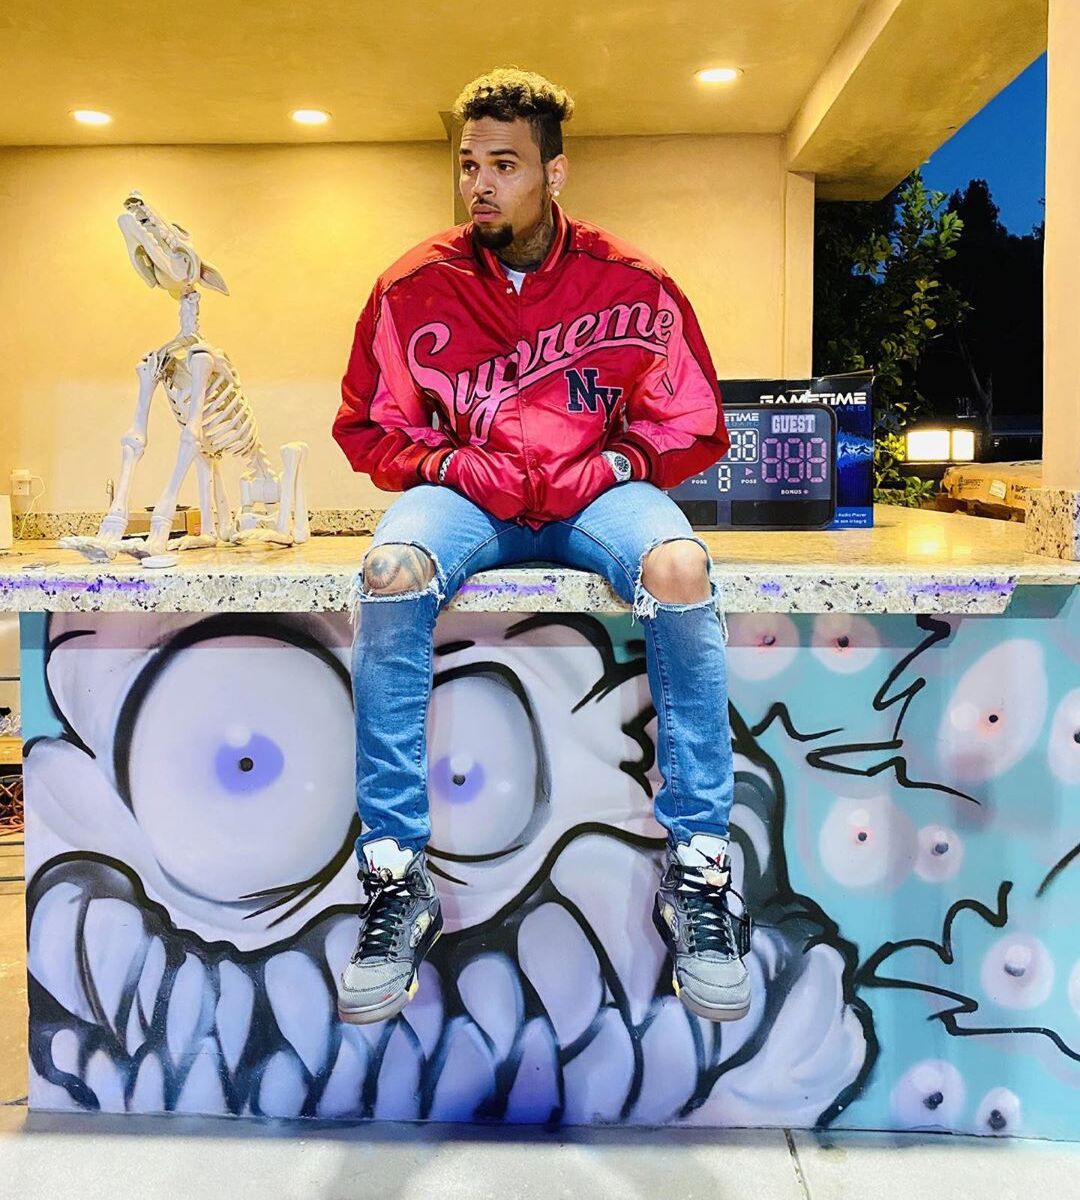 Chris Brown Wearing a Supreme Bomber with Off-White x Jordan 5s